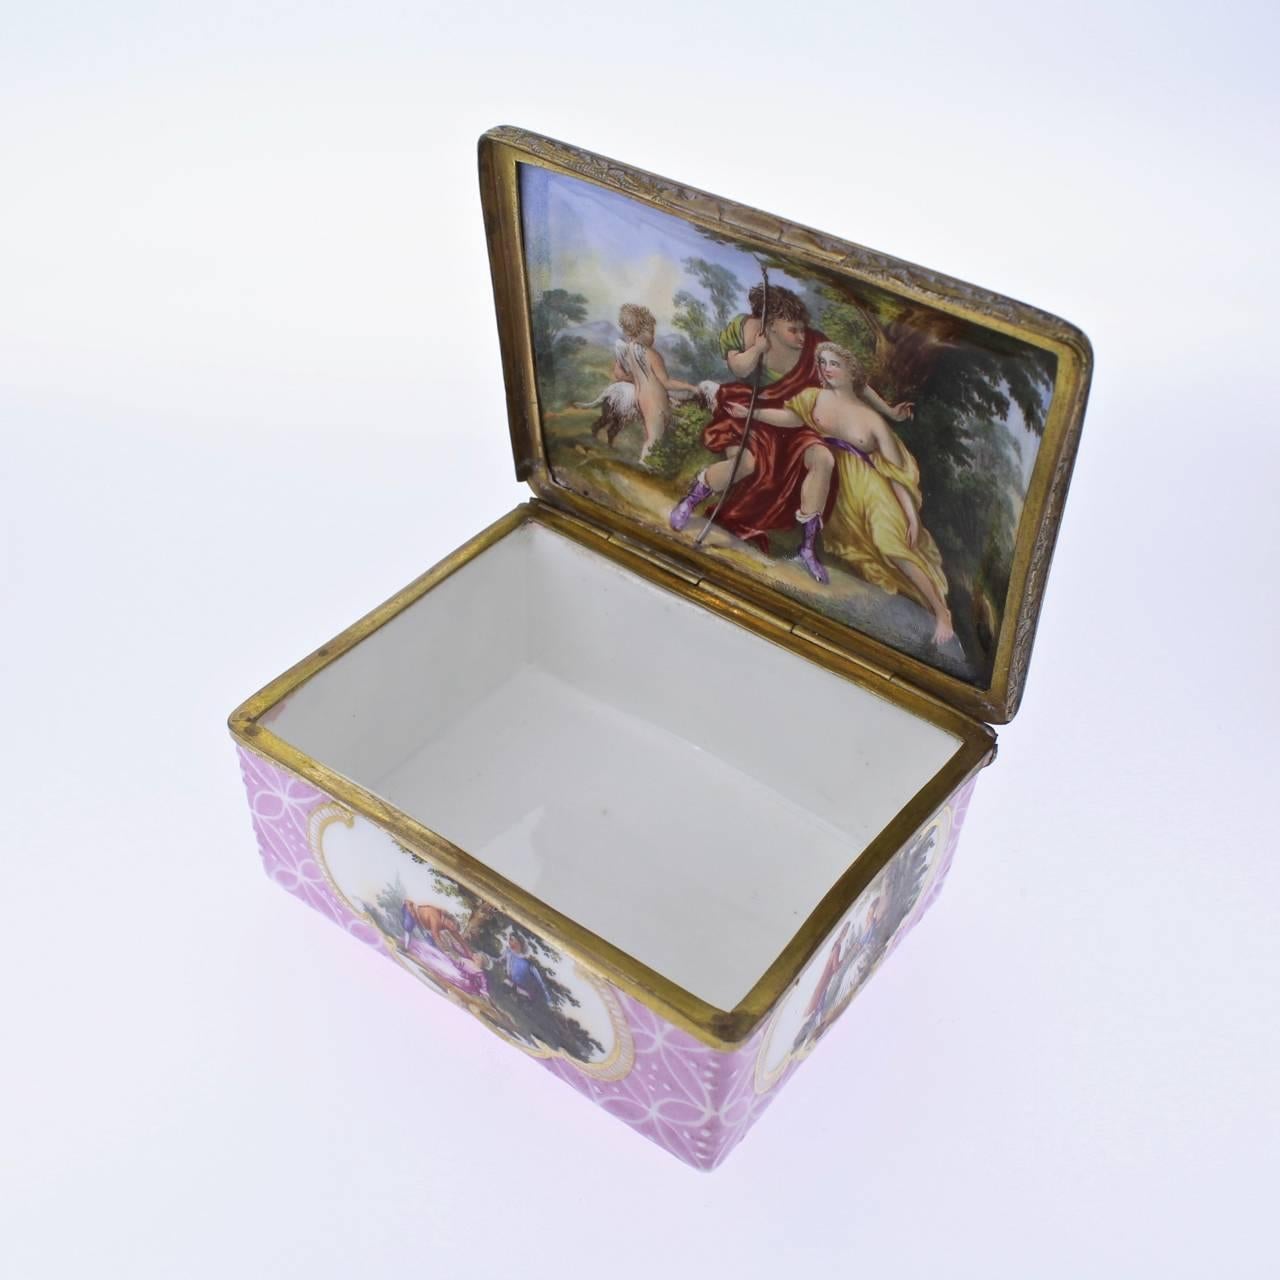 English Antique South Staffordshire or Battersea Enamel Table Snuff Box, 18th Century For Sale